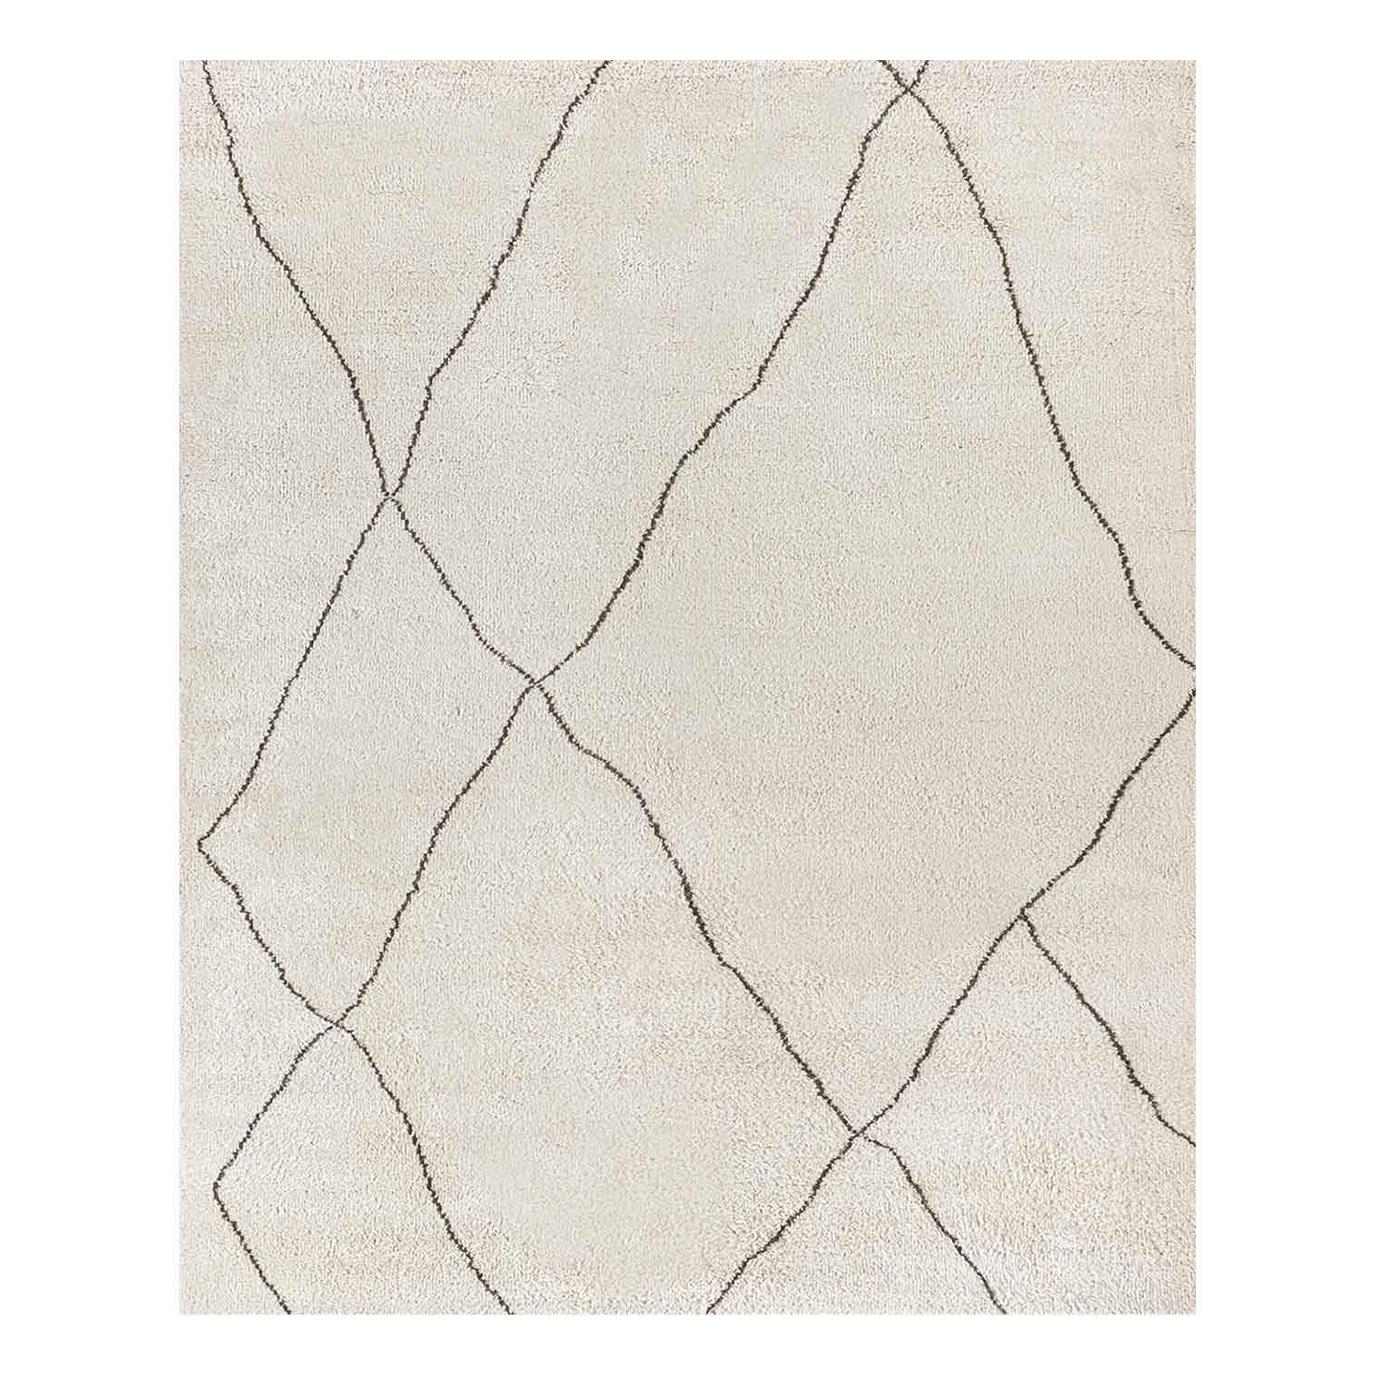 For Sale: Beige (Bisque/Cafe) Ben Soleimani Iona Rug– Moroccan Hand-knotted Wool Bisque/Cafe 9'x12'